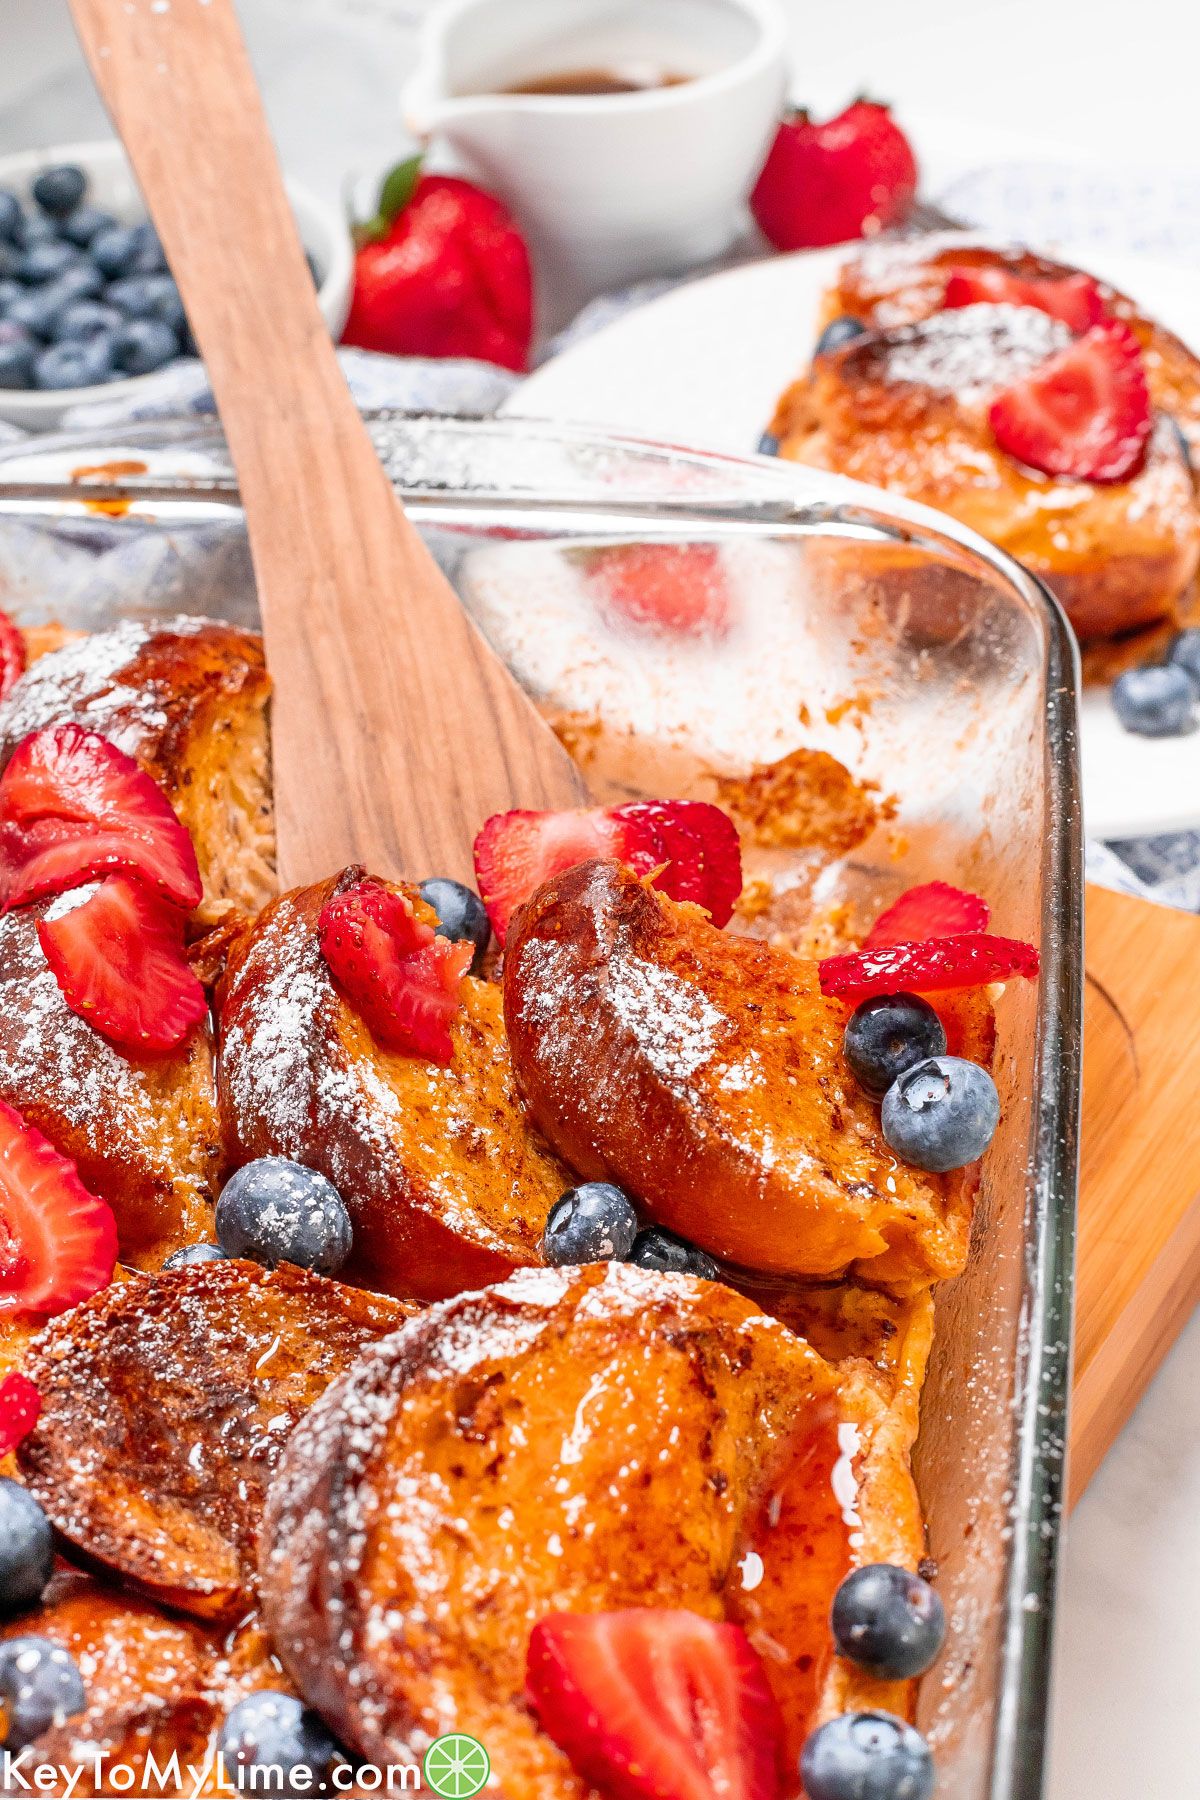 A close up image of a fully baked and garnished French toast bake showing the golden texture.